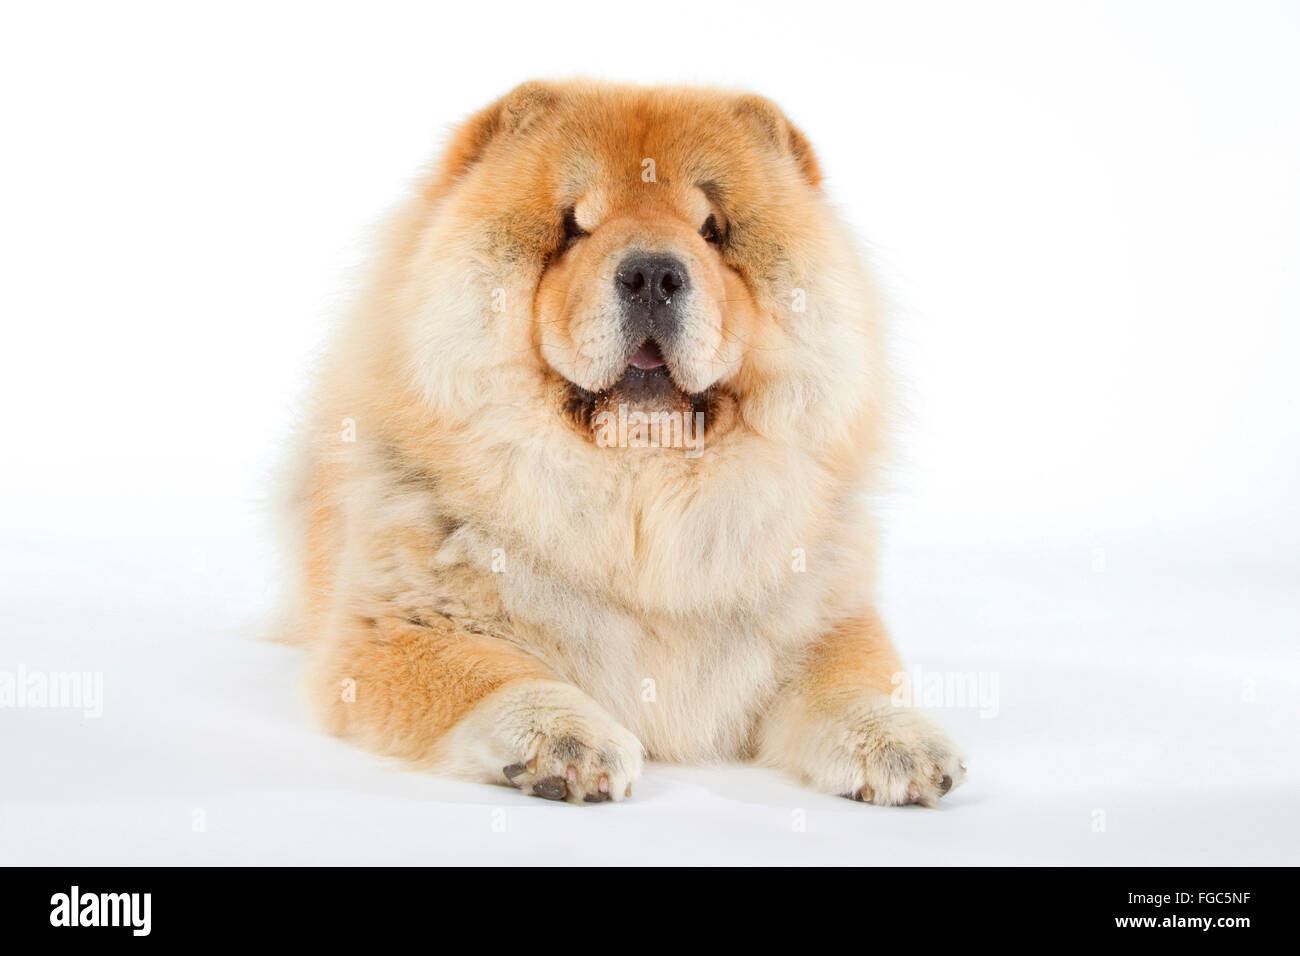 Chow Chow. Adult dog lying. Studio picture against a white background. Germany Stock Photo